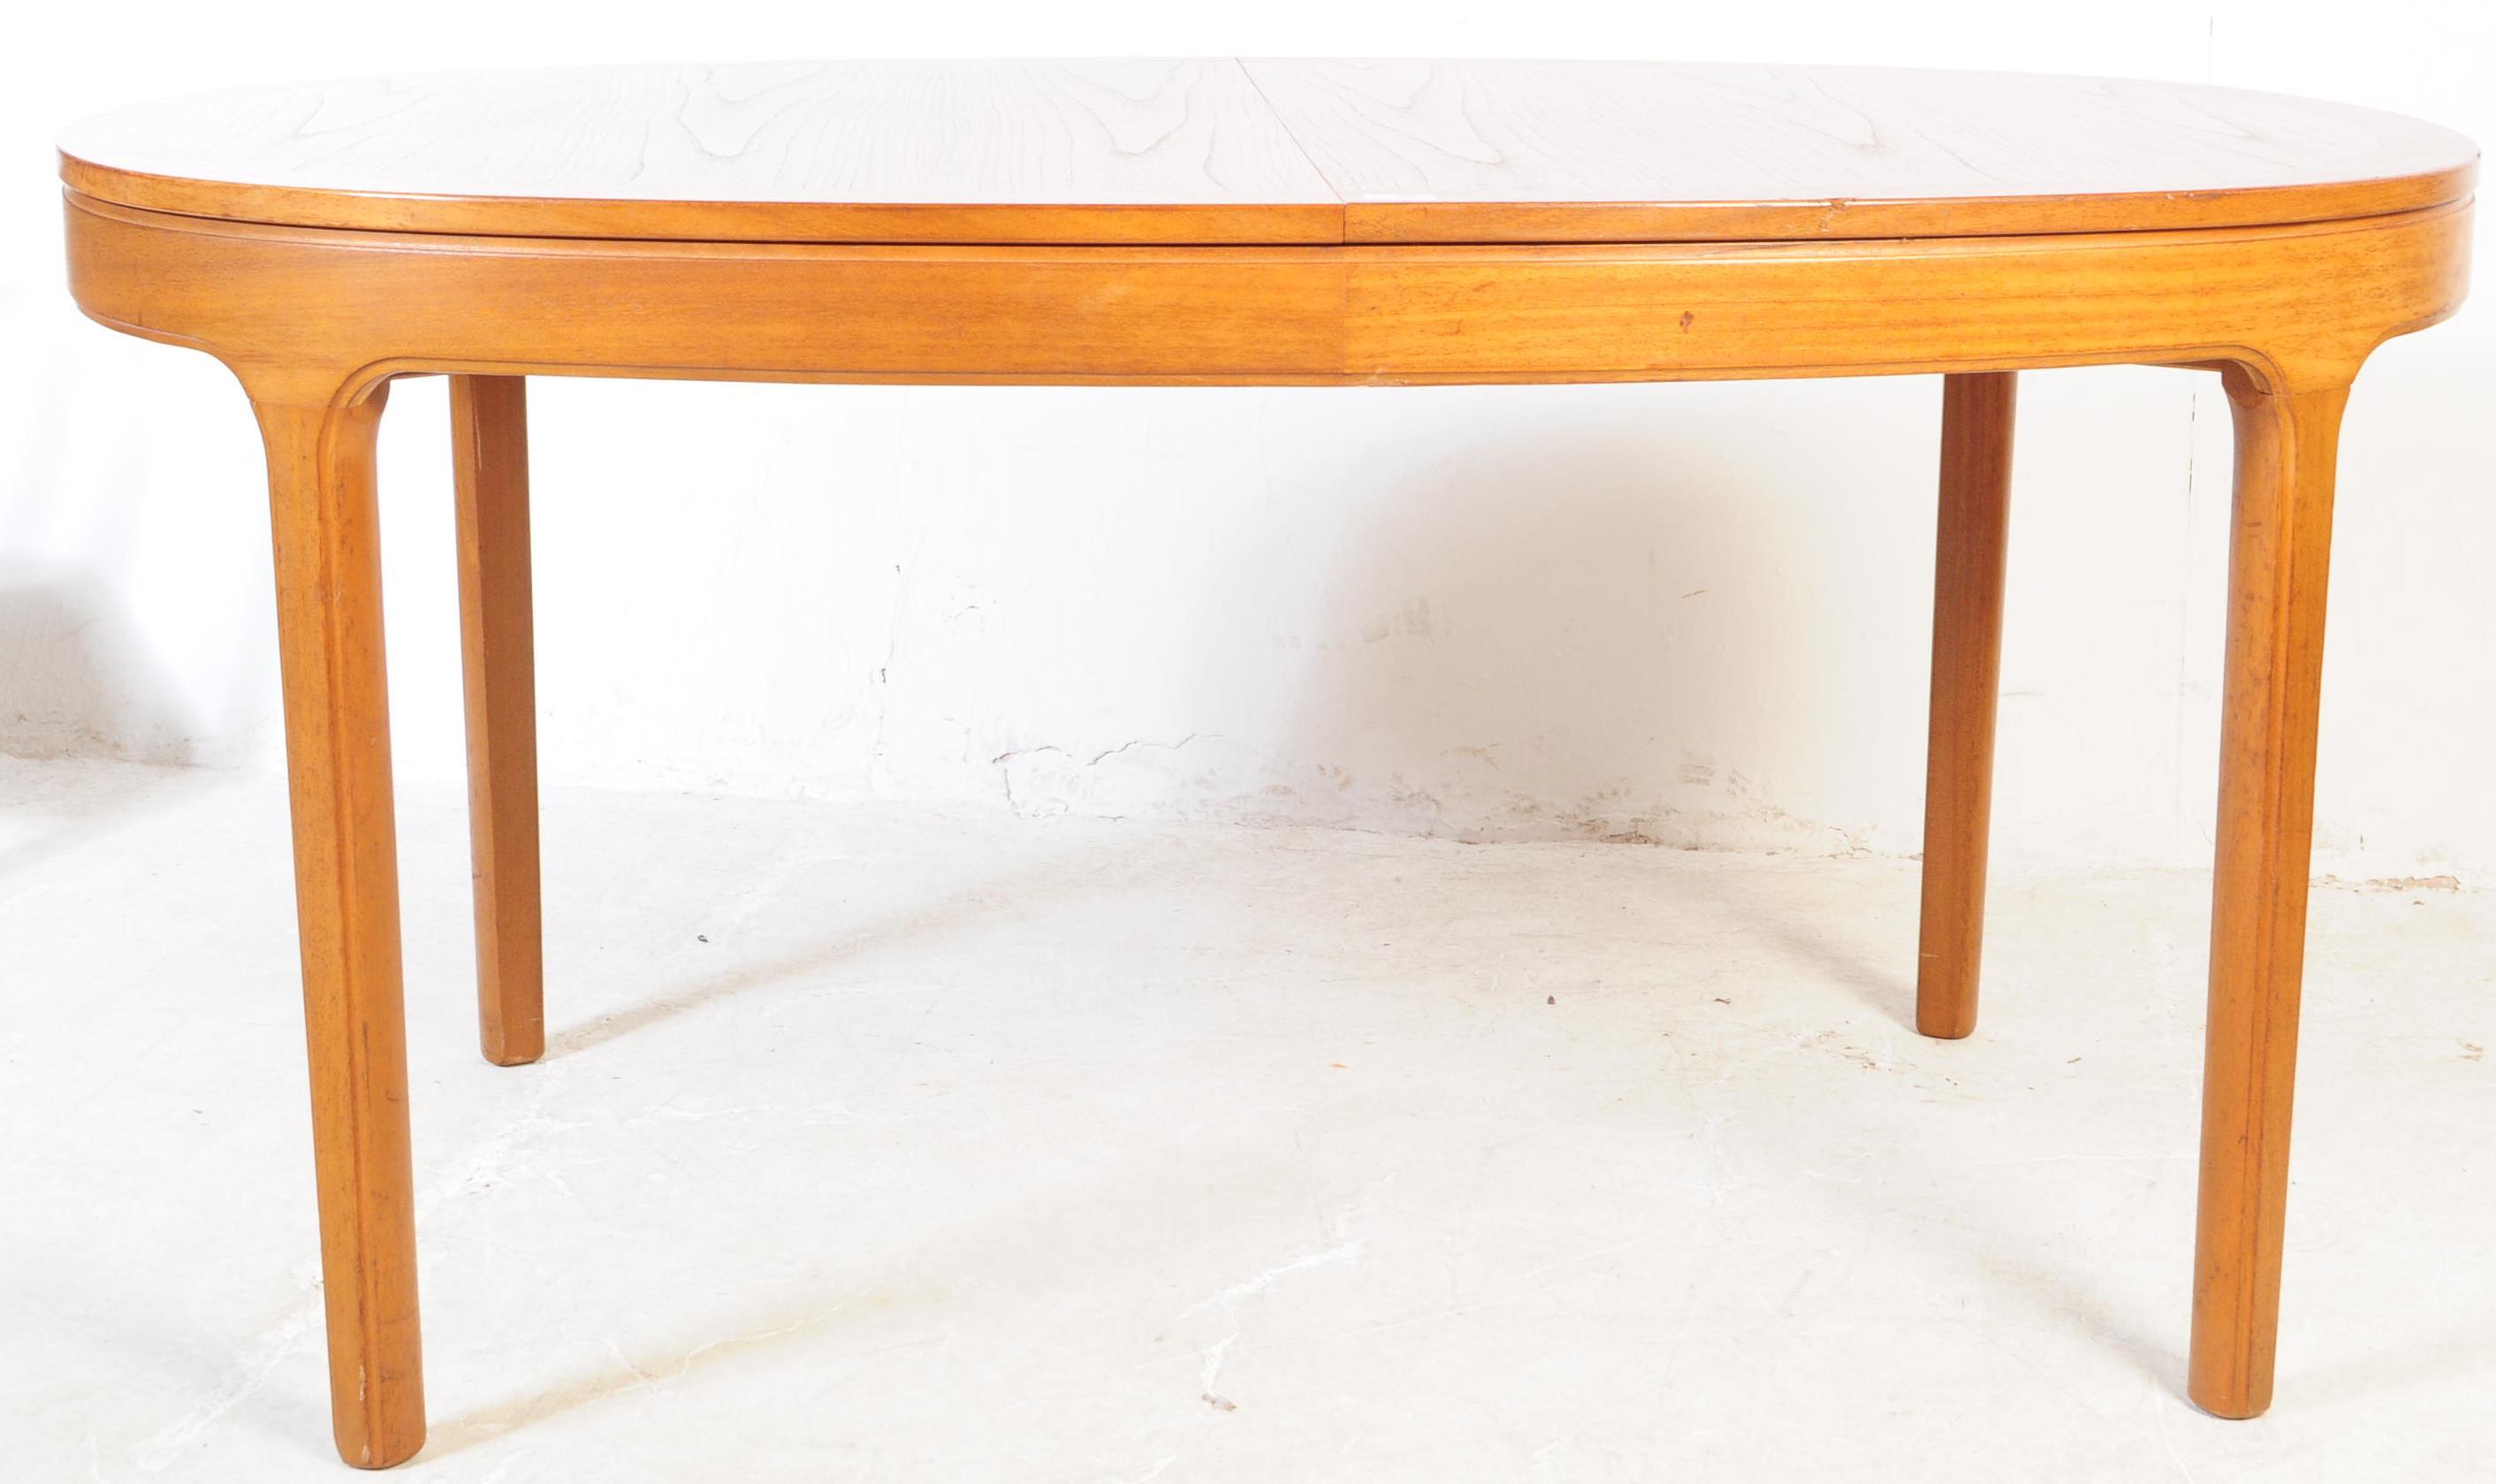 VINTAGE MID 20TH CENTURY TEAK NATHAN DINING TABLE & CHAIRS - Image 2 of 7